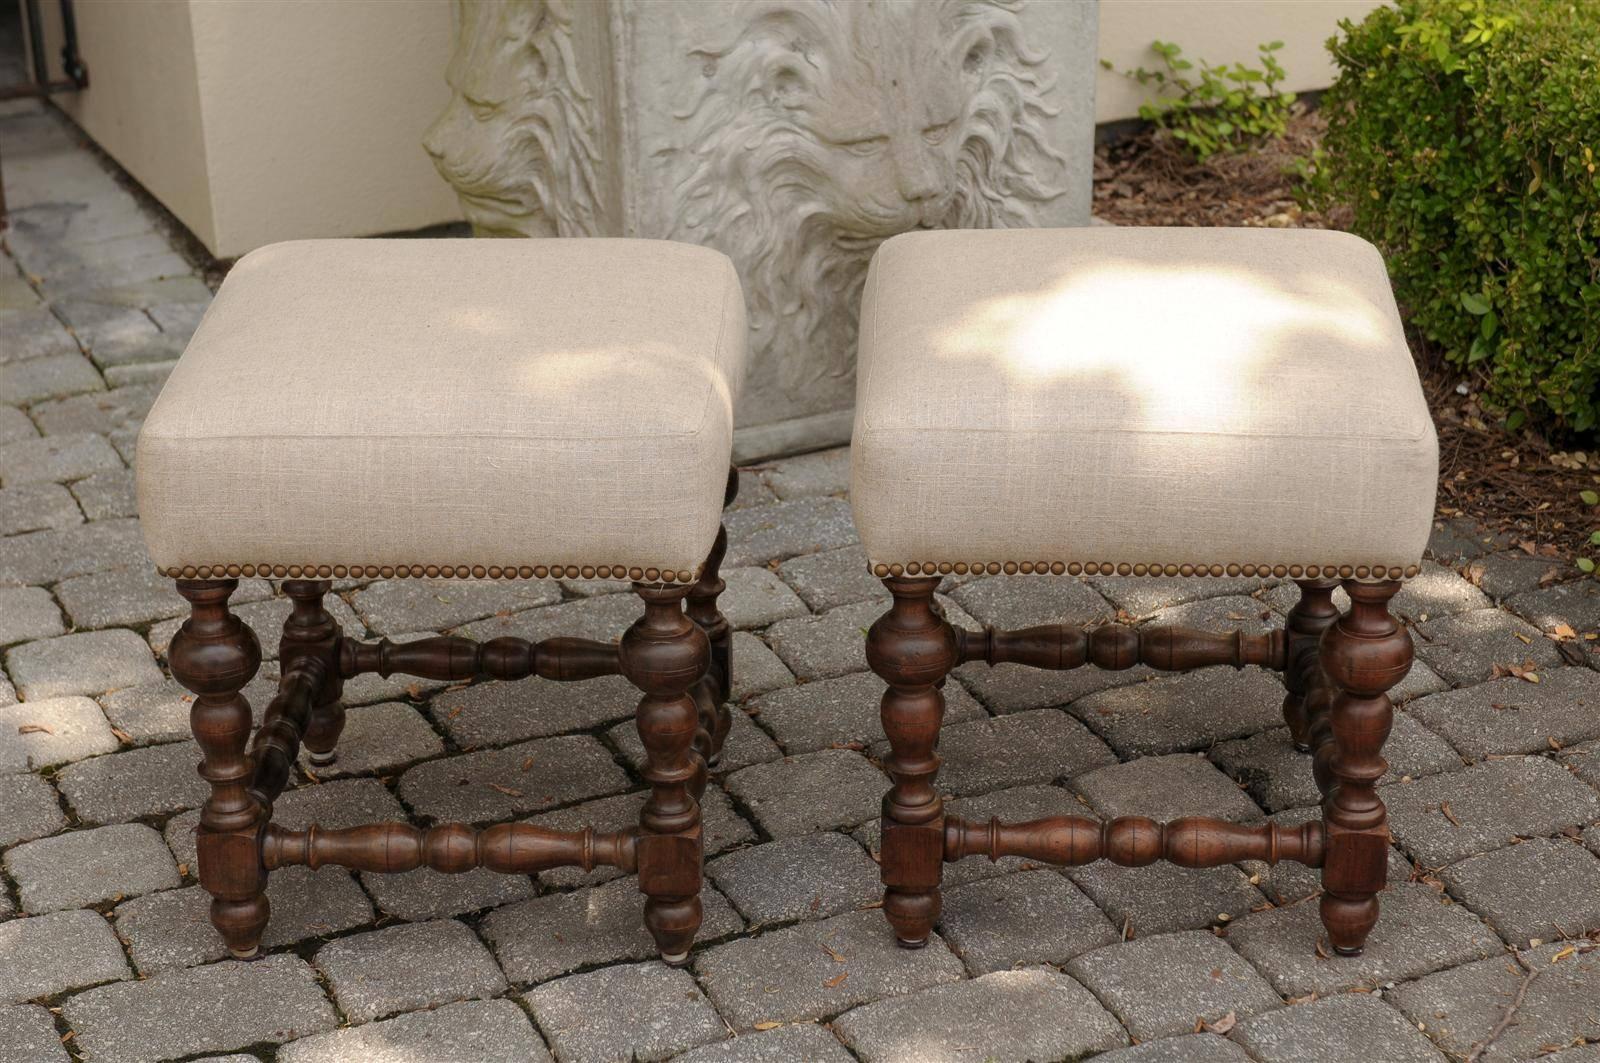 Pair of English 1870s Walnut Upholstered Stools with Turned Legs and Stretchers 1